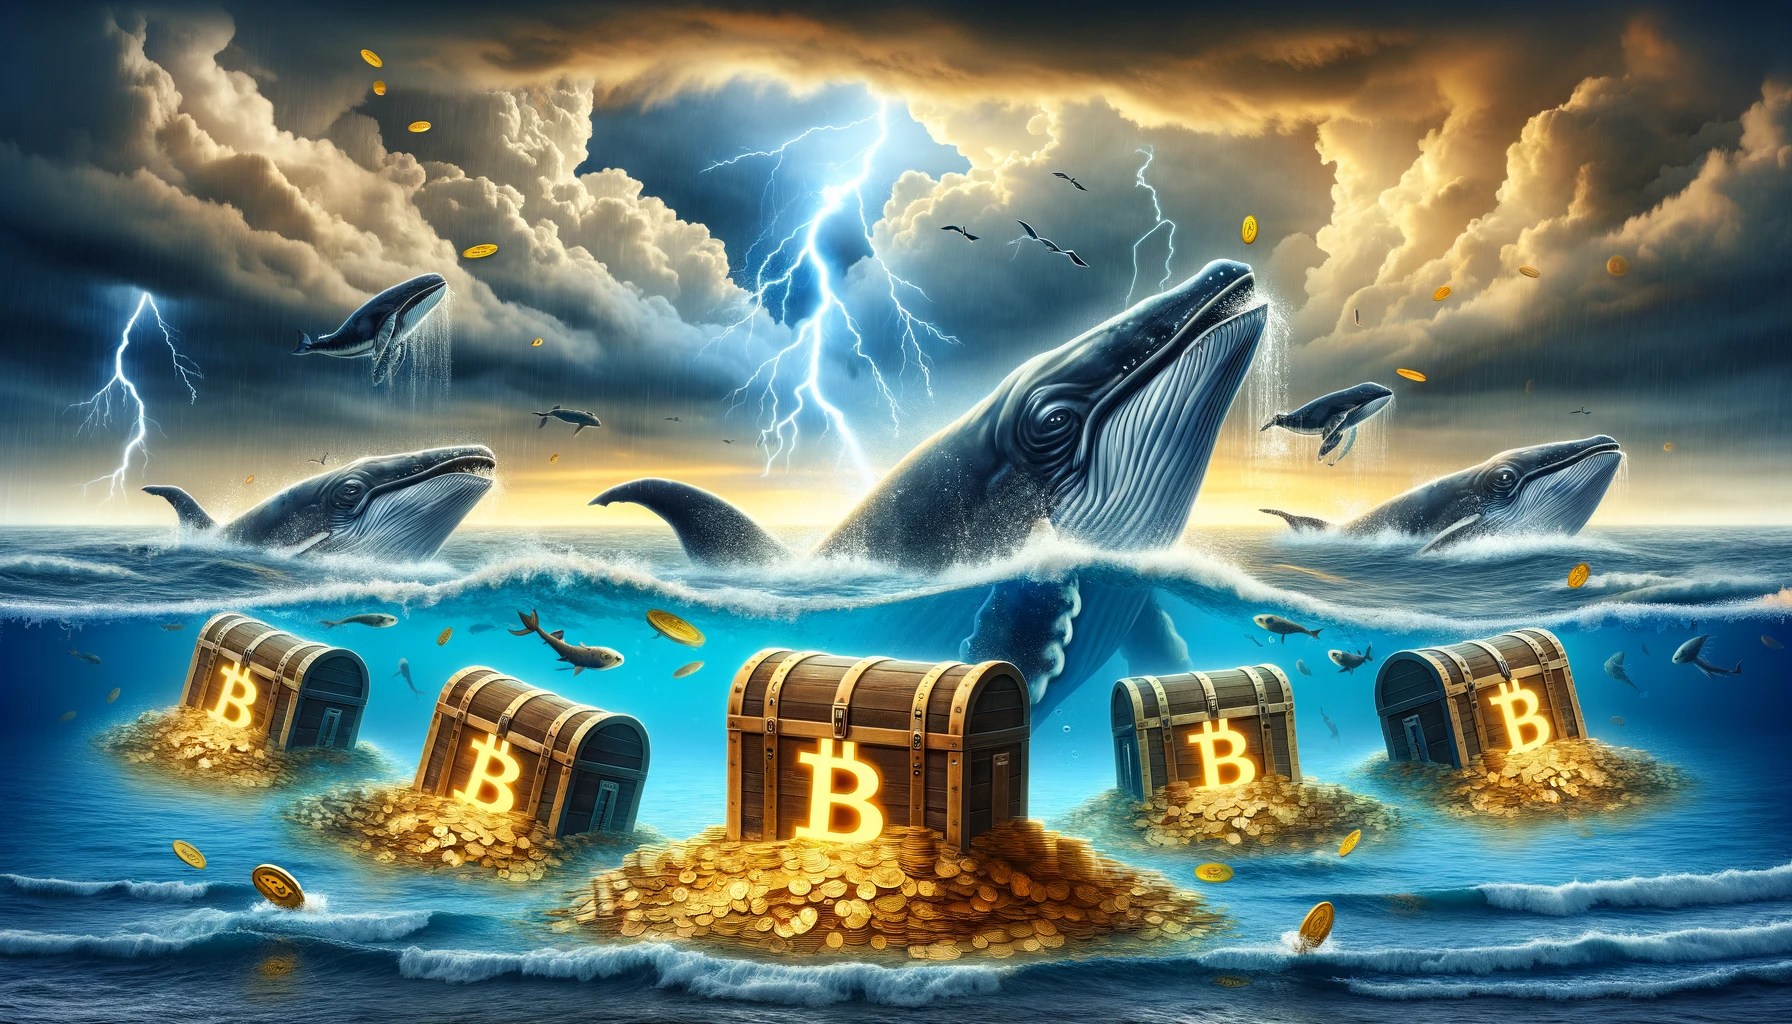 Bitcoin Whales Buy While Market Panics As $950M Worth Of BTC Leaves Exchanges